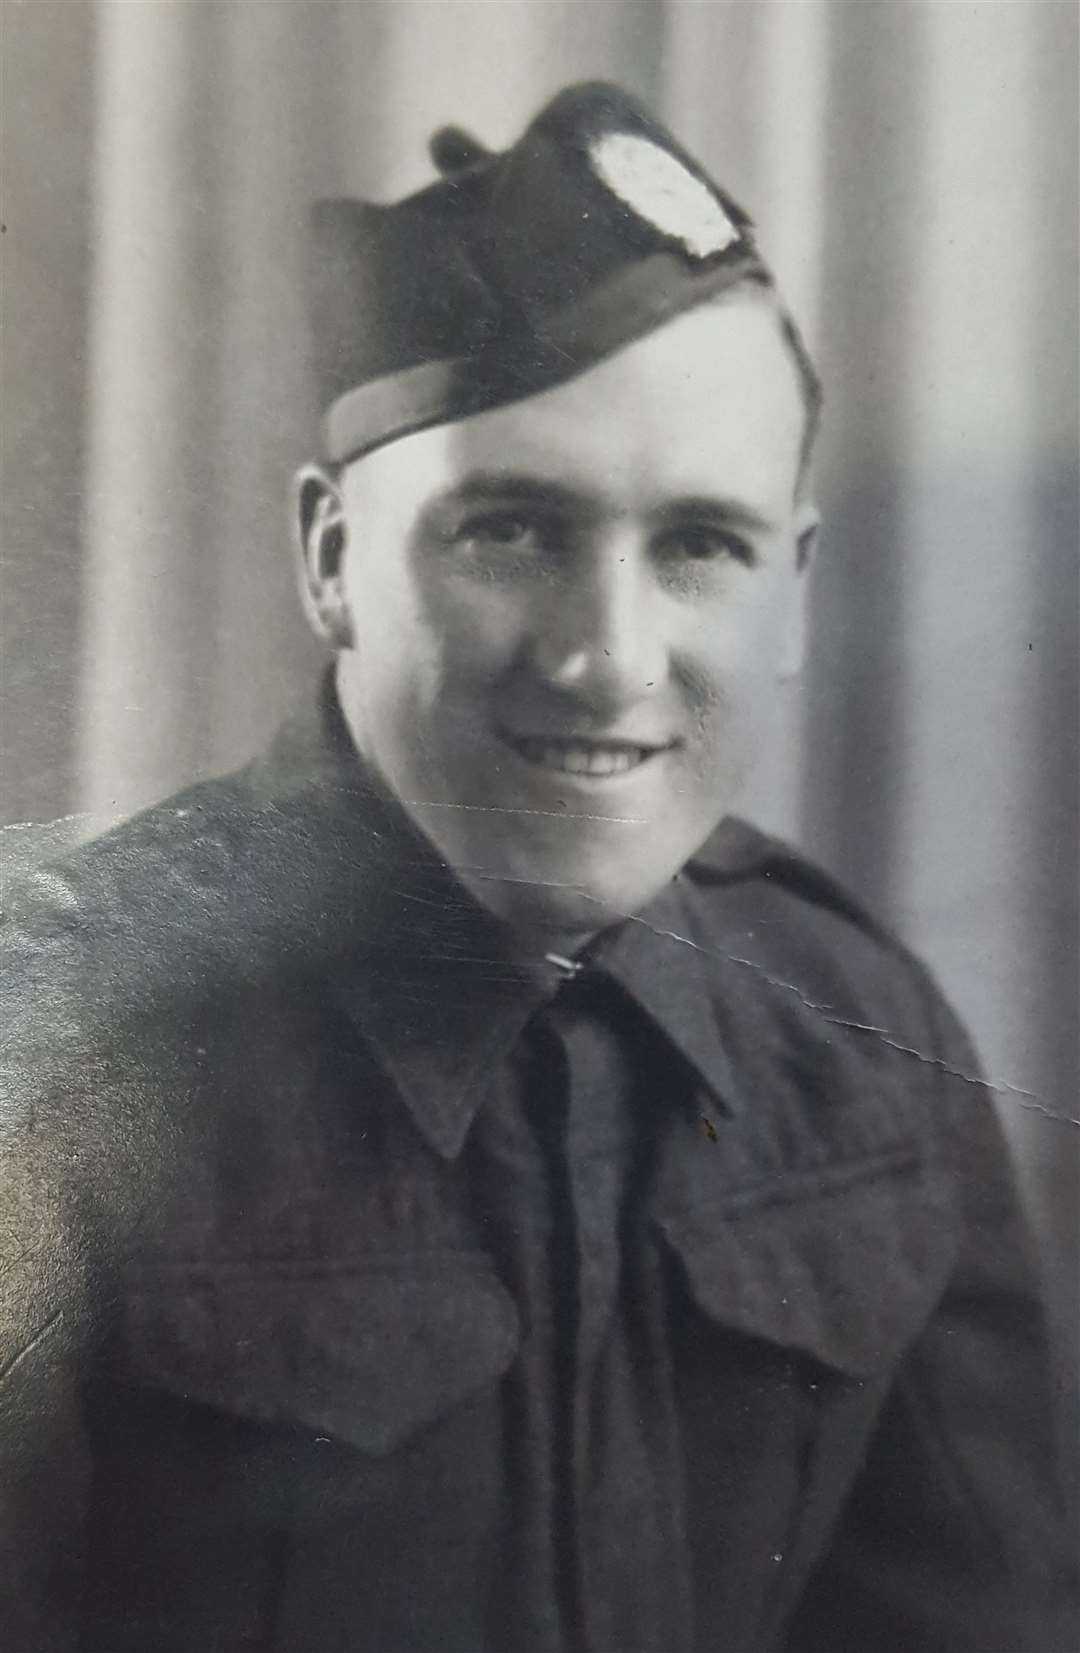 Private Leslie Burkett when he joined the army, aged 19